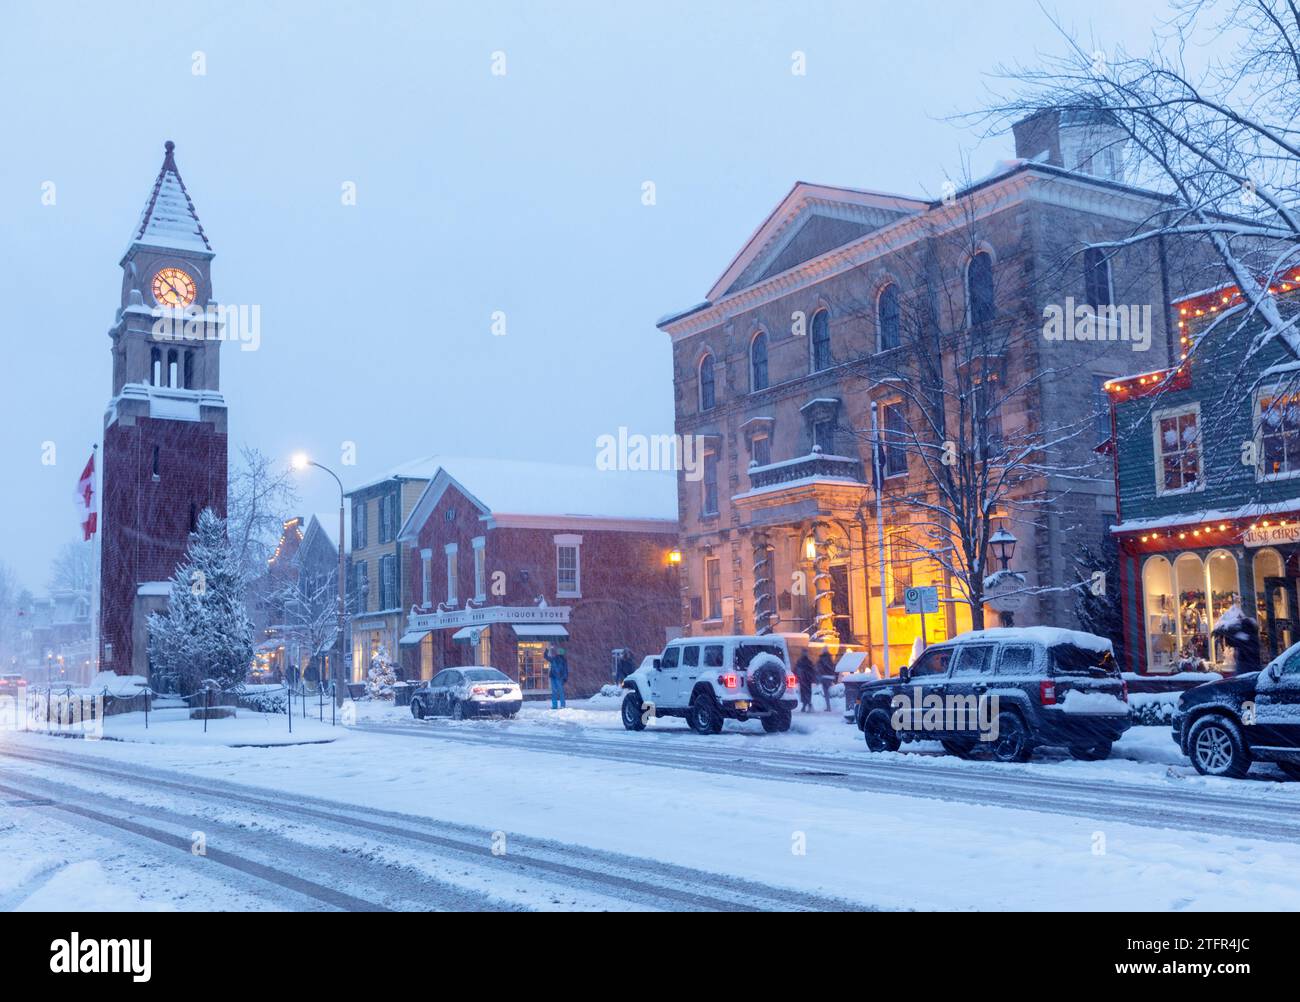 Canada, Ontario, Niagara on the Lake, a snowy winter scene of the main street with the iconic clock tower and court house at dusk Stock Photo